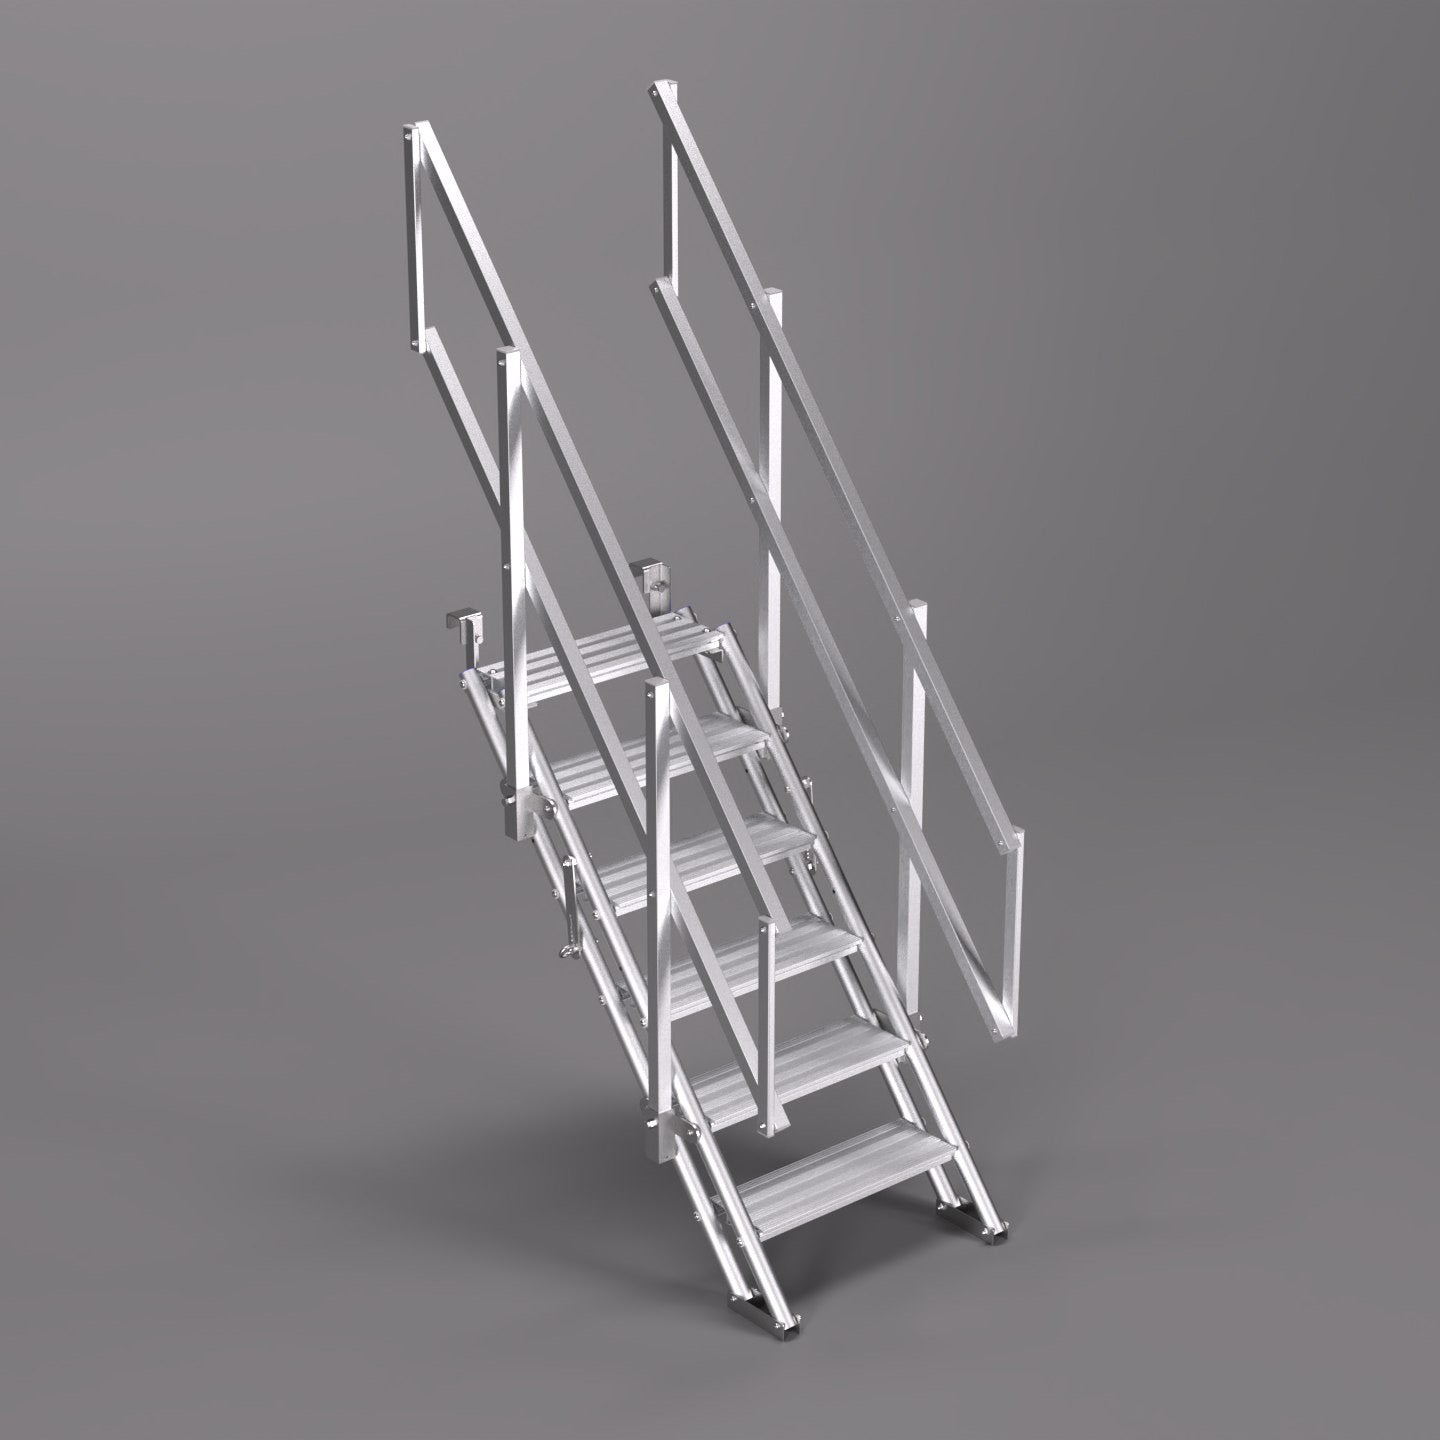 An image of a 1.5m ALTO Universal Stair Set with the scaffold tube hook option.